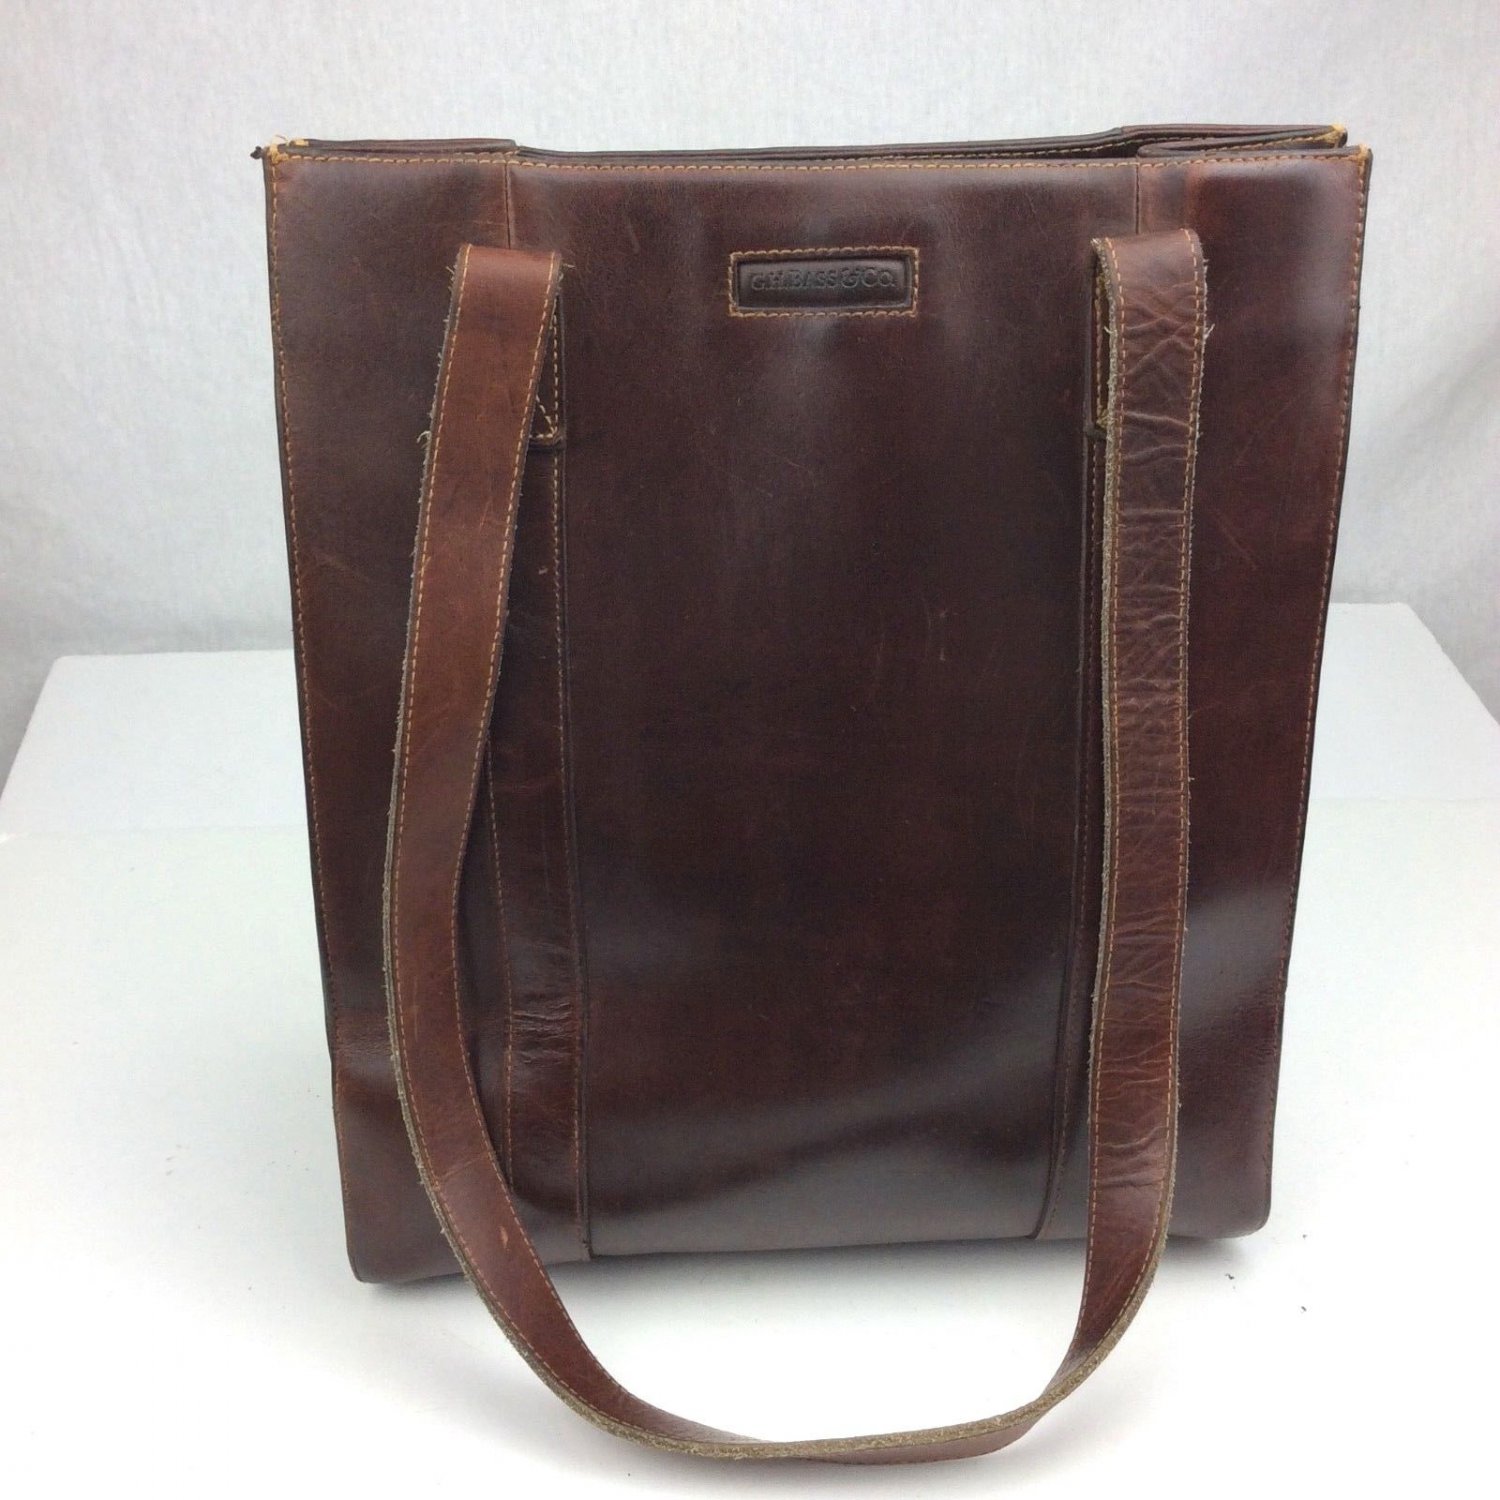 GH BASS CO Brown Pebbled Leather Tote Bag Vintage Heavyweight